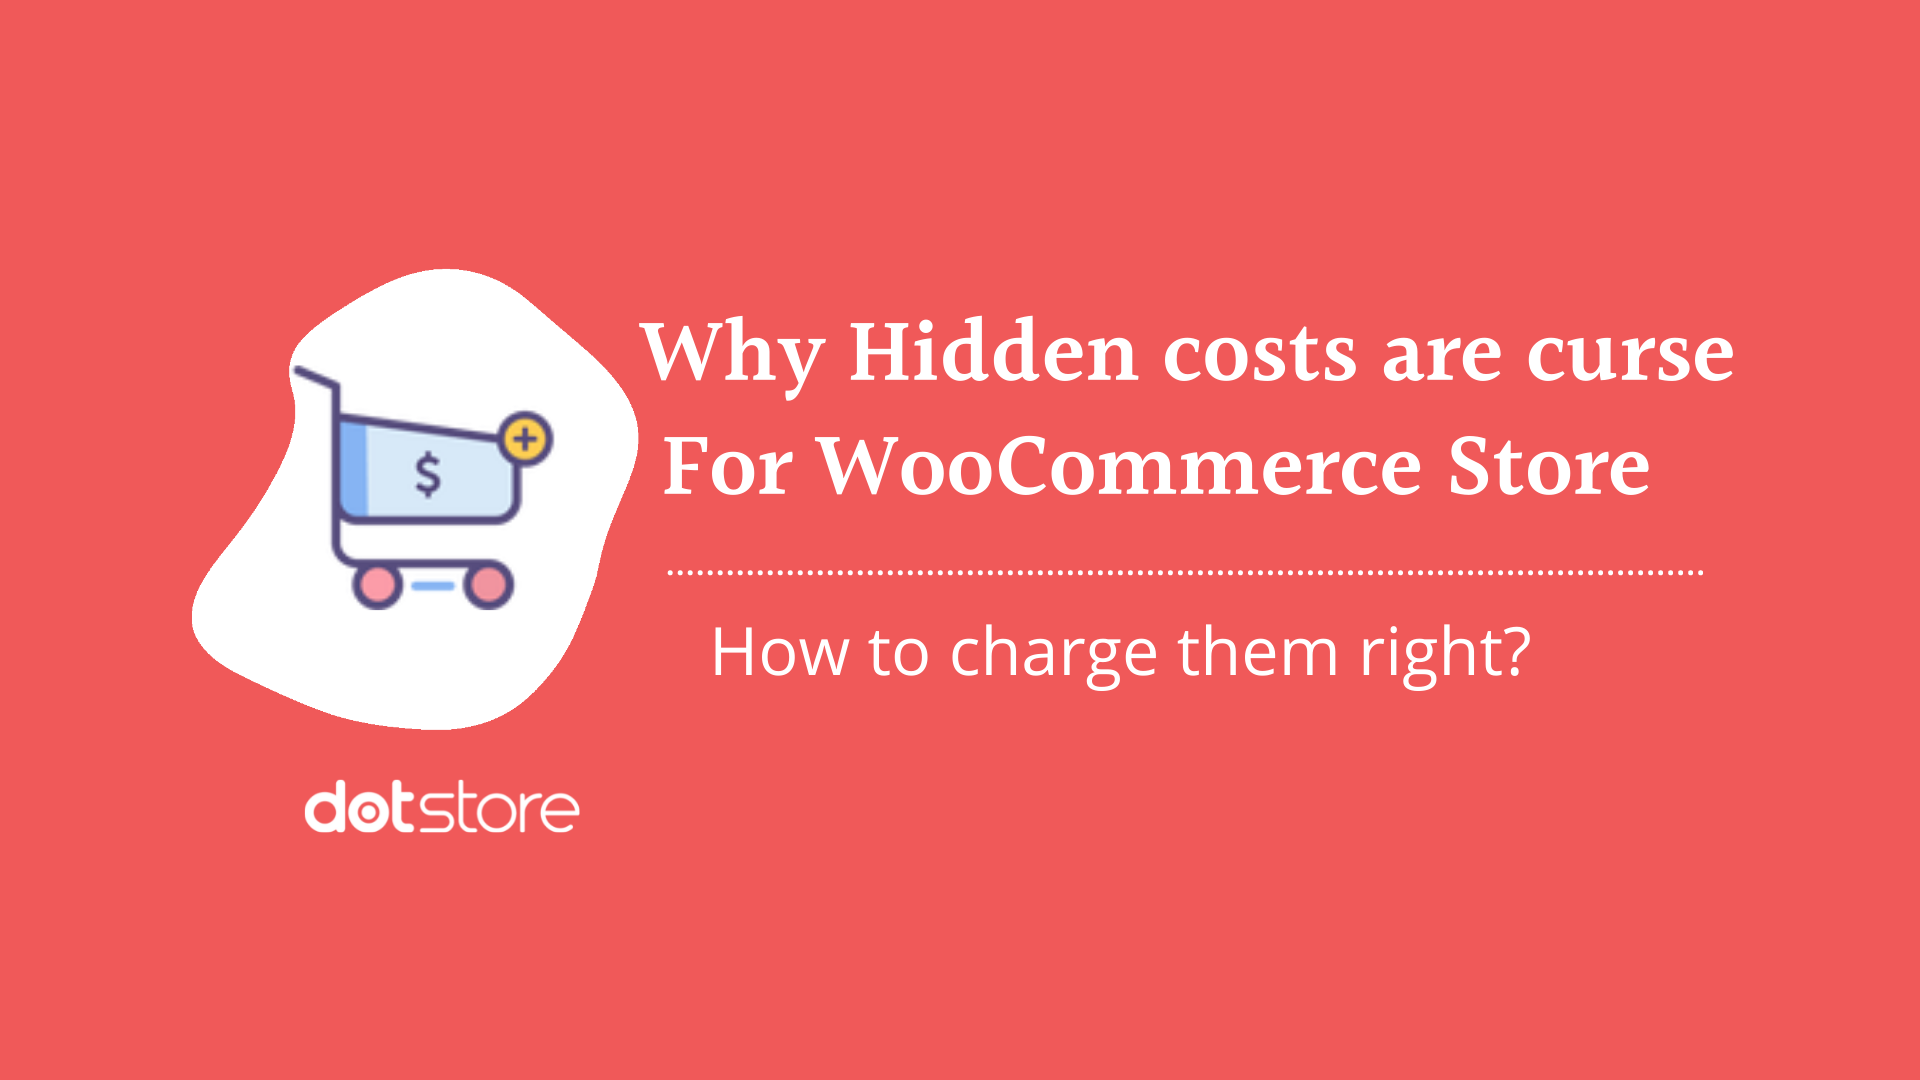 Why Hidden Costs are Curse for Your Store and how to Charge them right?